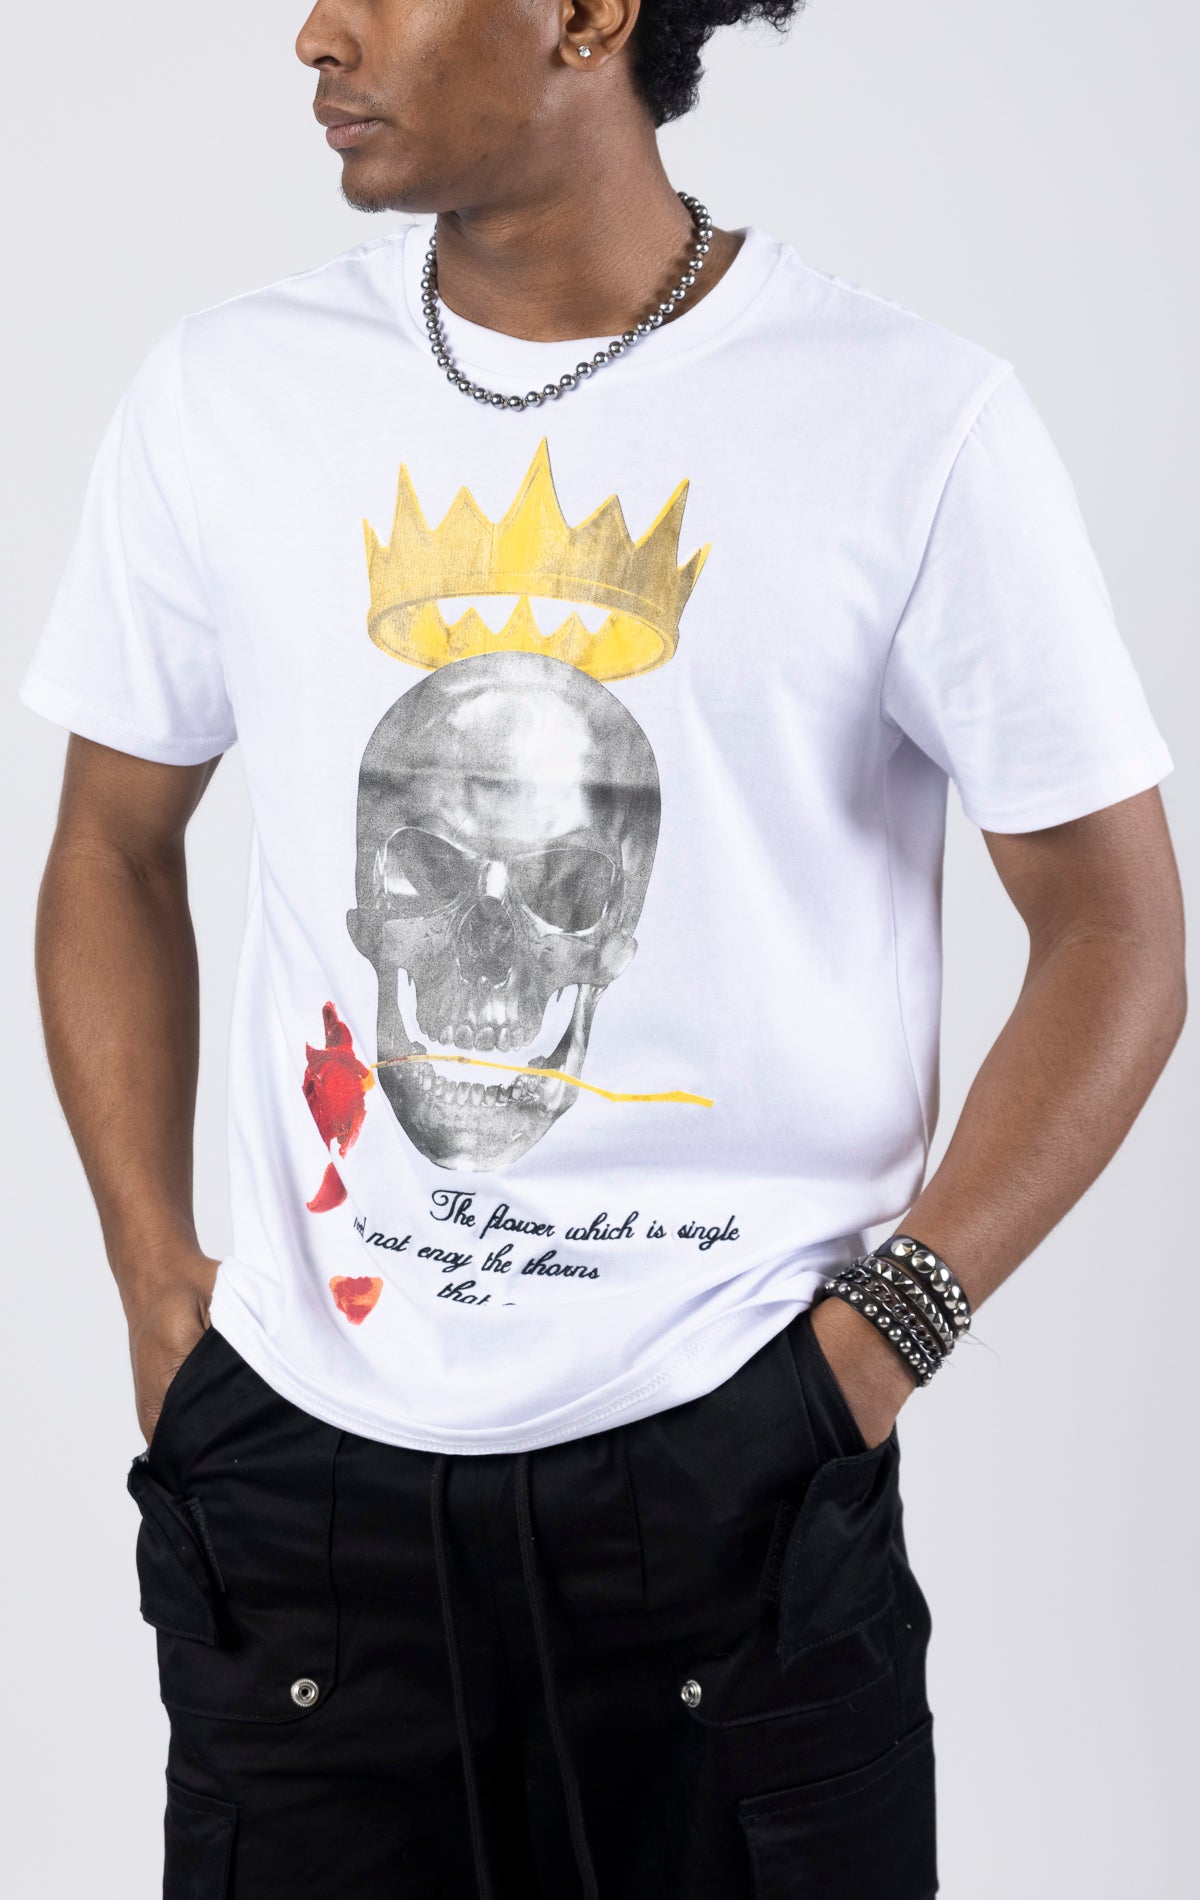 Graphic crewneck t-shirt in white featuring a skull king design on the front. The shirt is made from a blend of 65% polyester and 35% cotton.